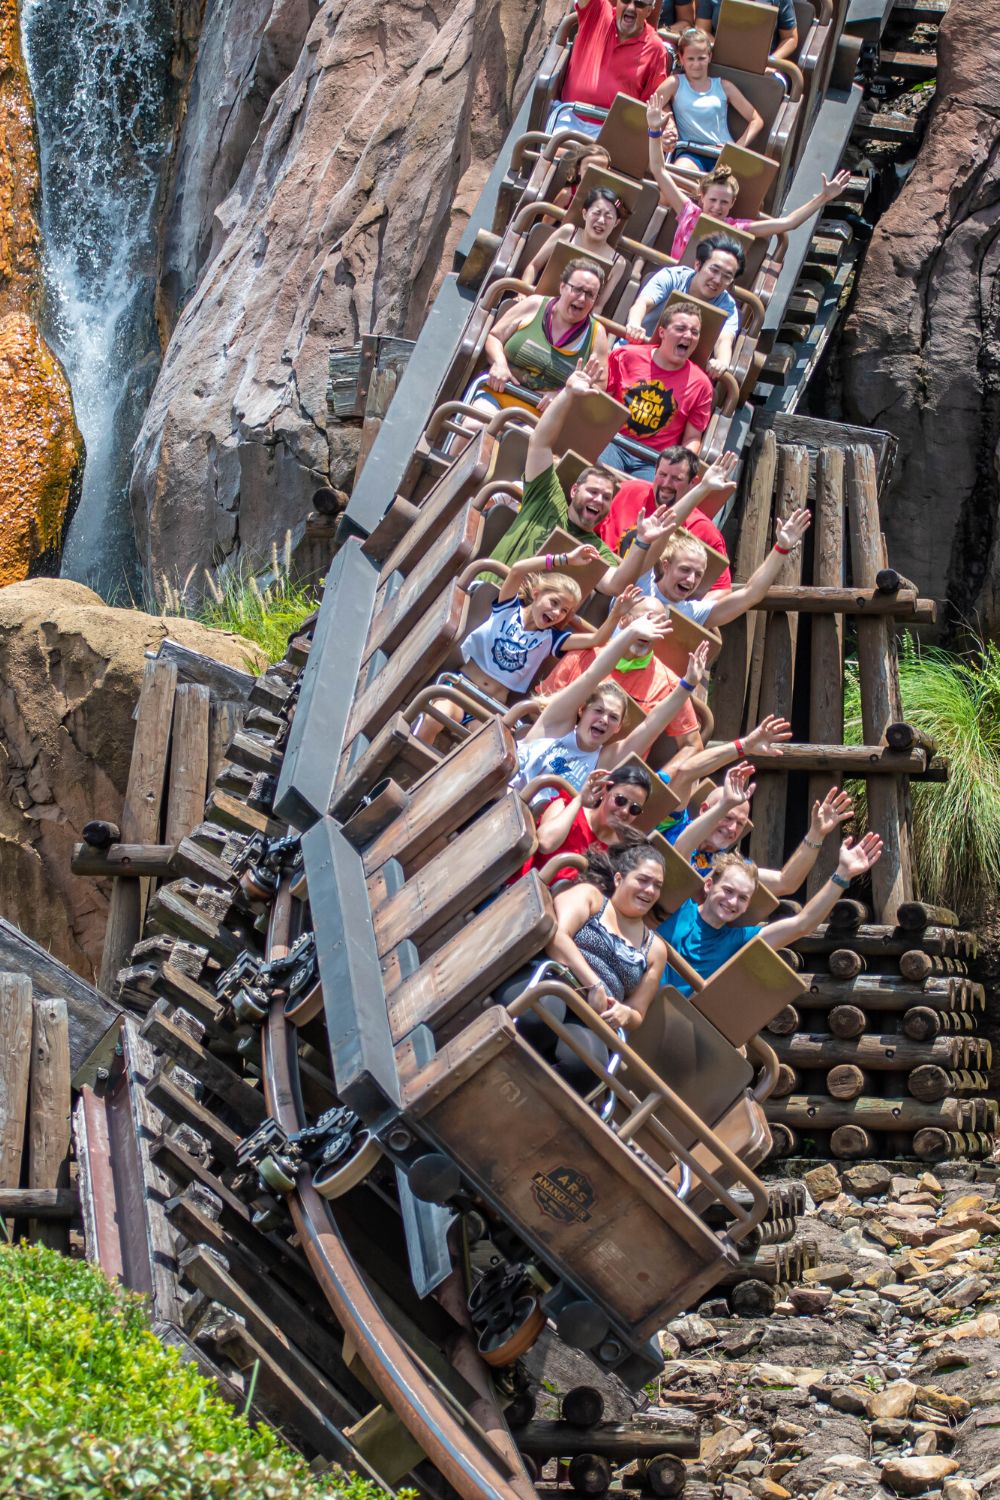 Expedition Everest ride at Animal Kingdom in Disney World